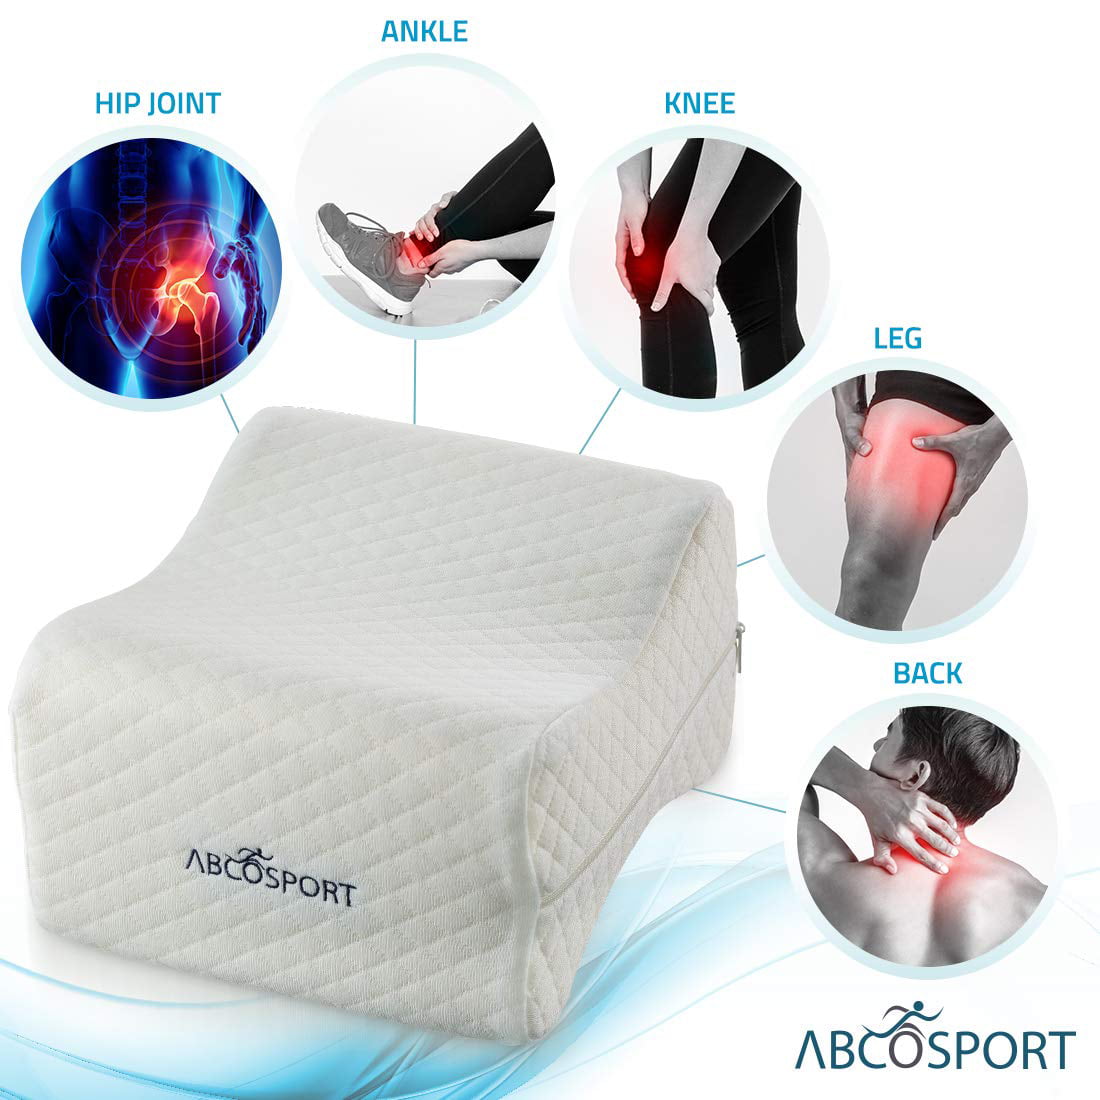 Knee Pillow - Ideal Choice for Hip, Back, Leg, Knee Pain, Side